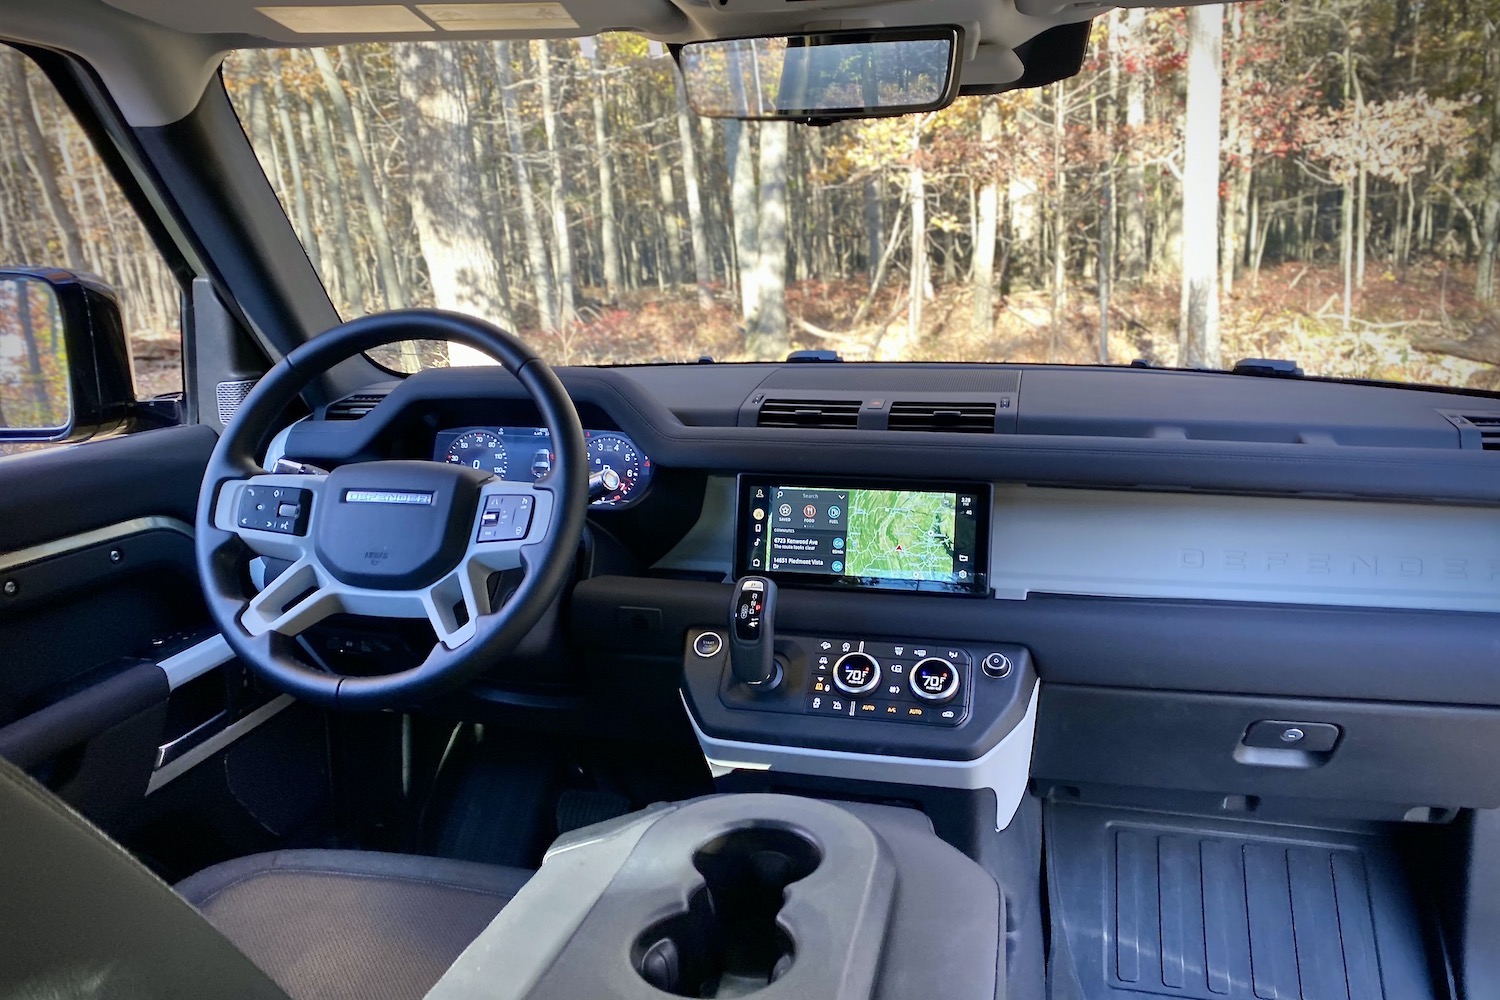 Land Rover Defender dashboard from rear seats with trees in the back.